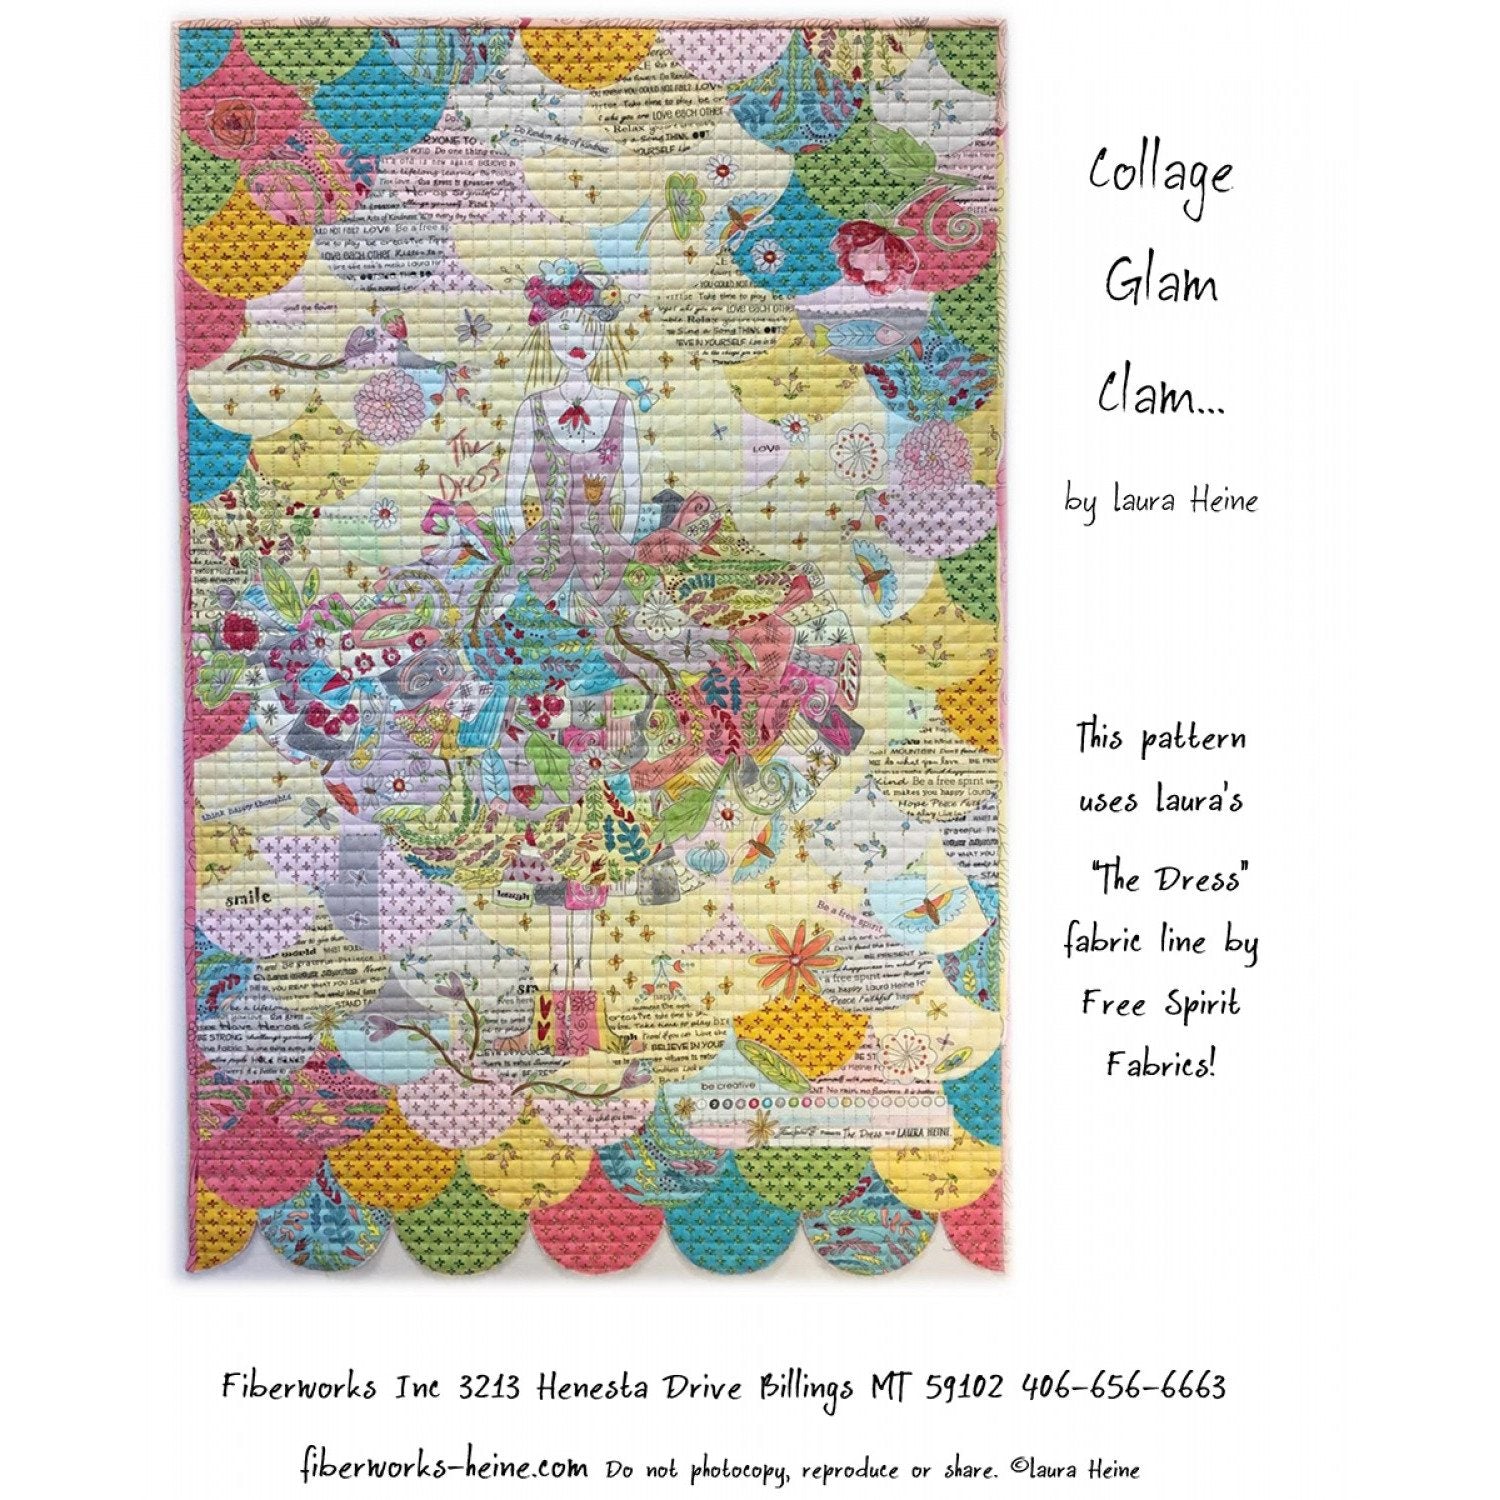 Glam Clam Collage Pattern image # 40639